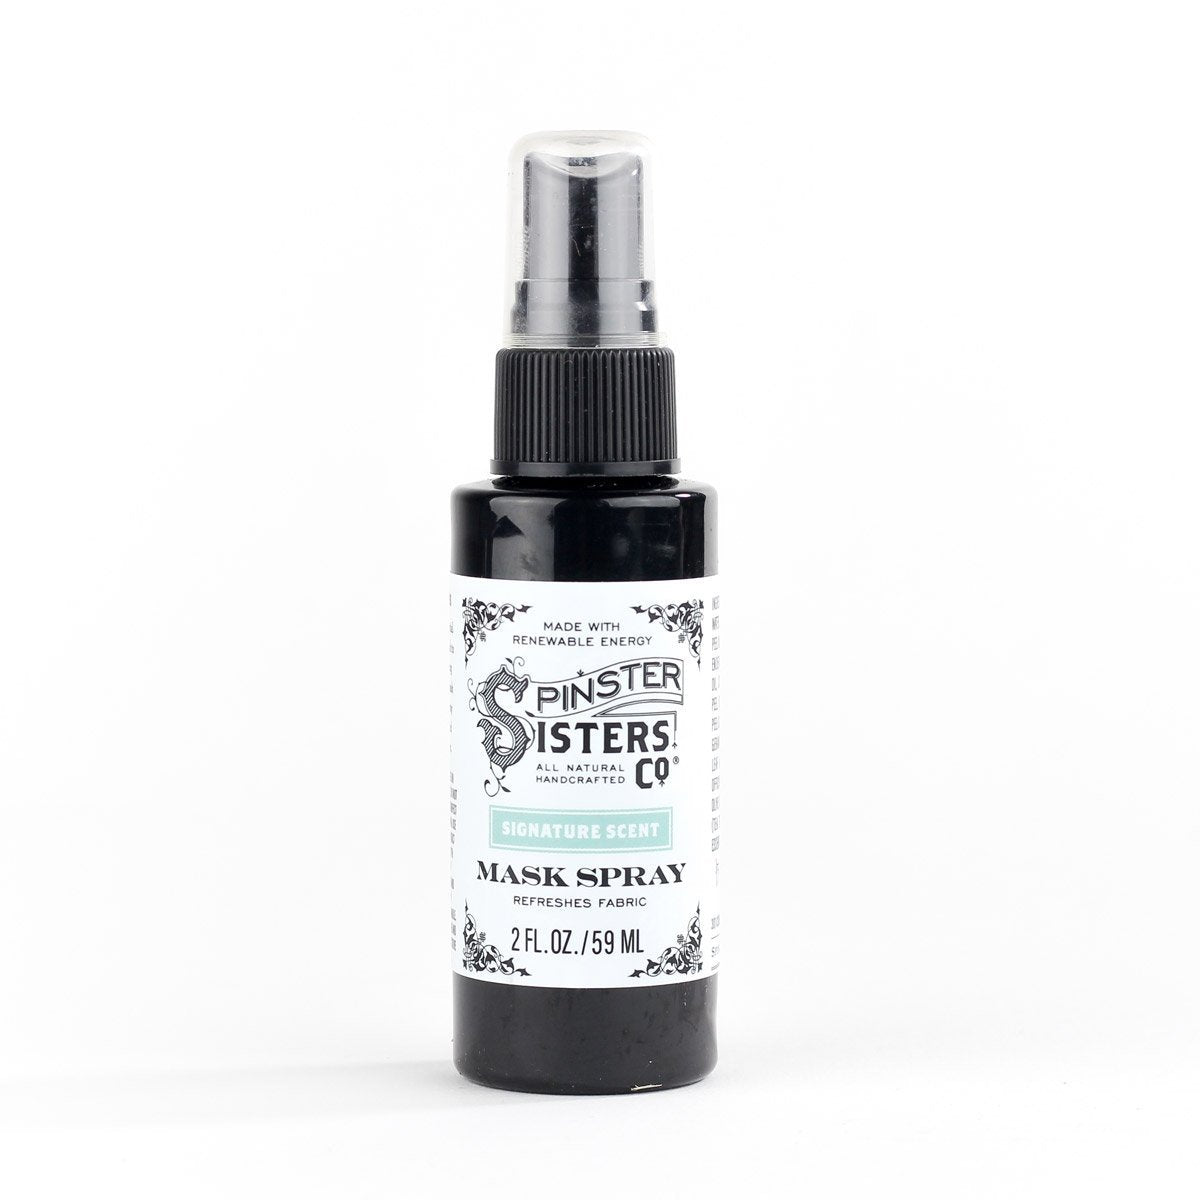 A black and white bottle of Spinster Sisters Mask Spray with a detailed label, against a plain white background.